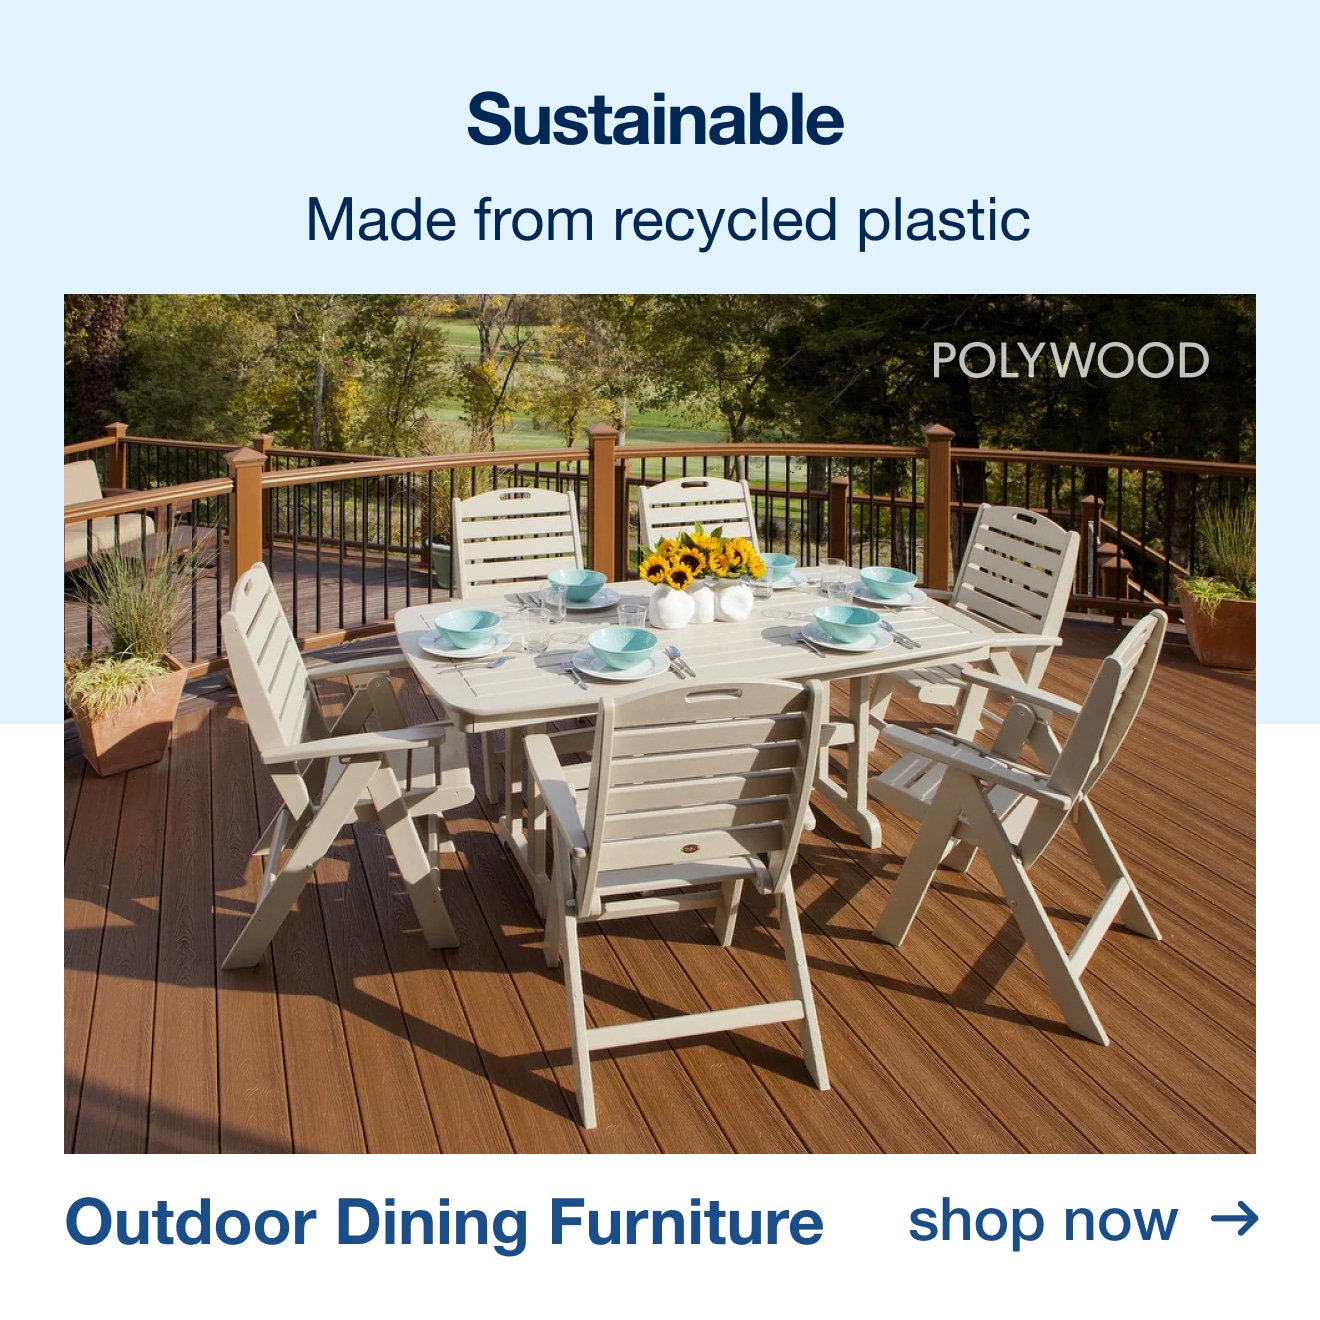 Polywood Outdoor Dining Furniture